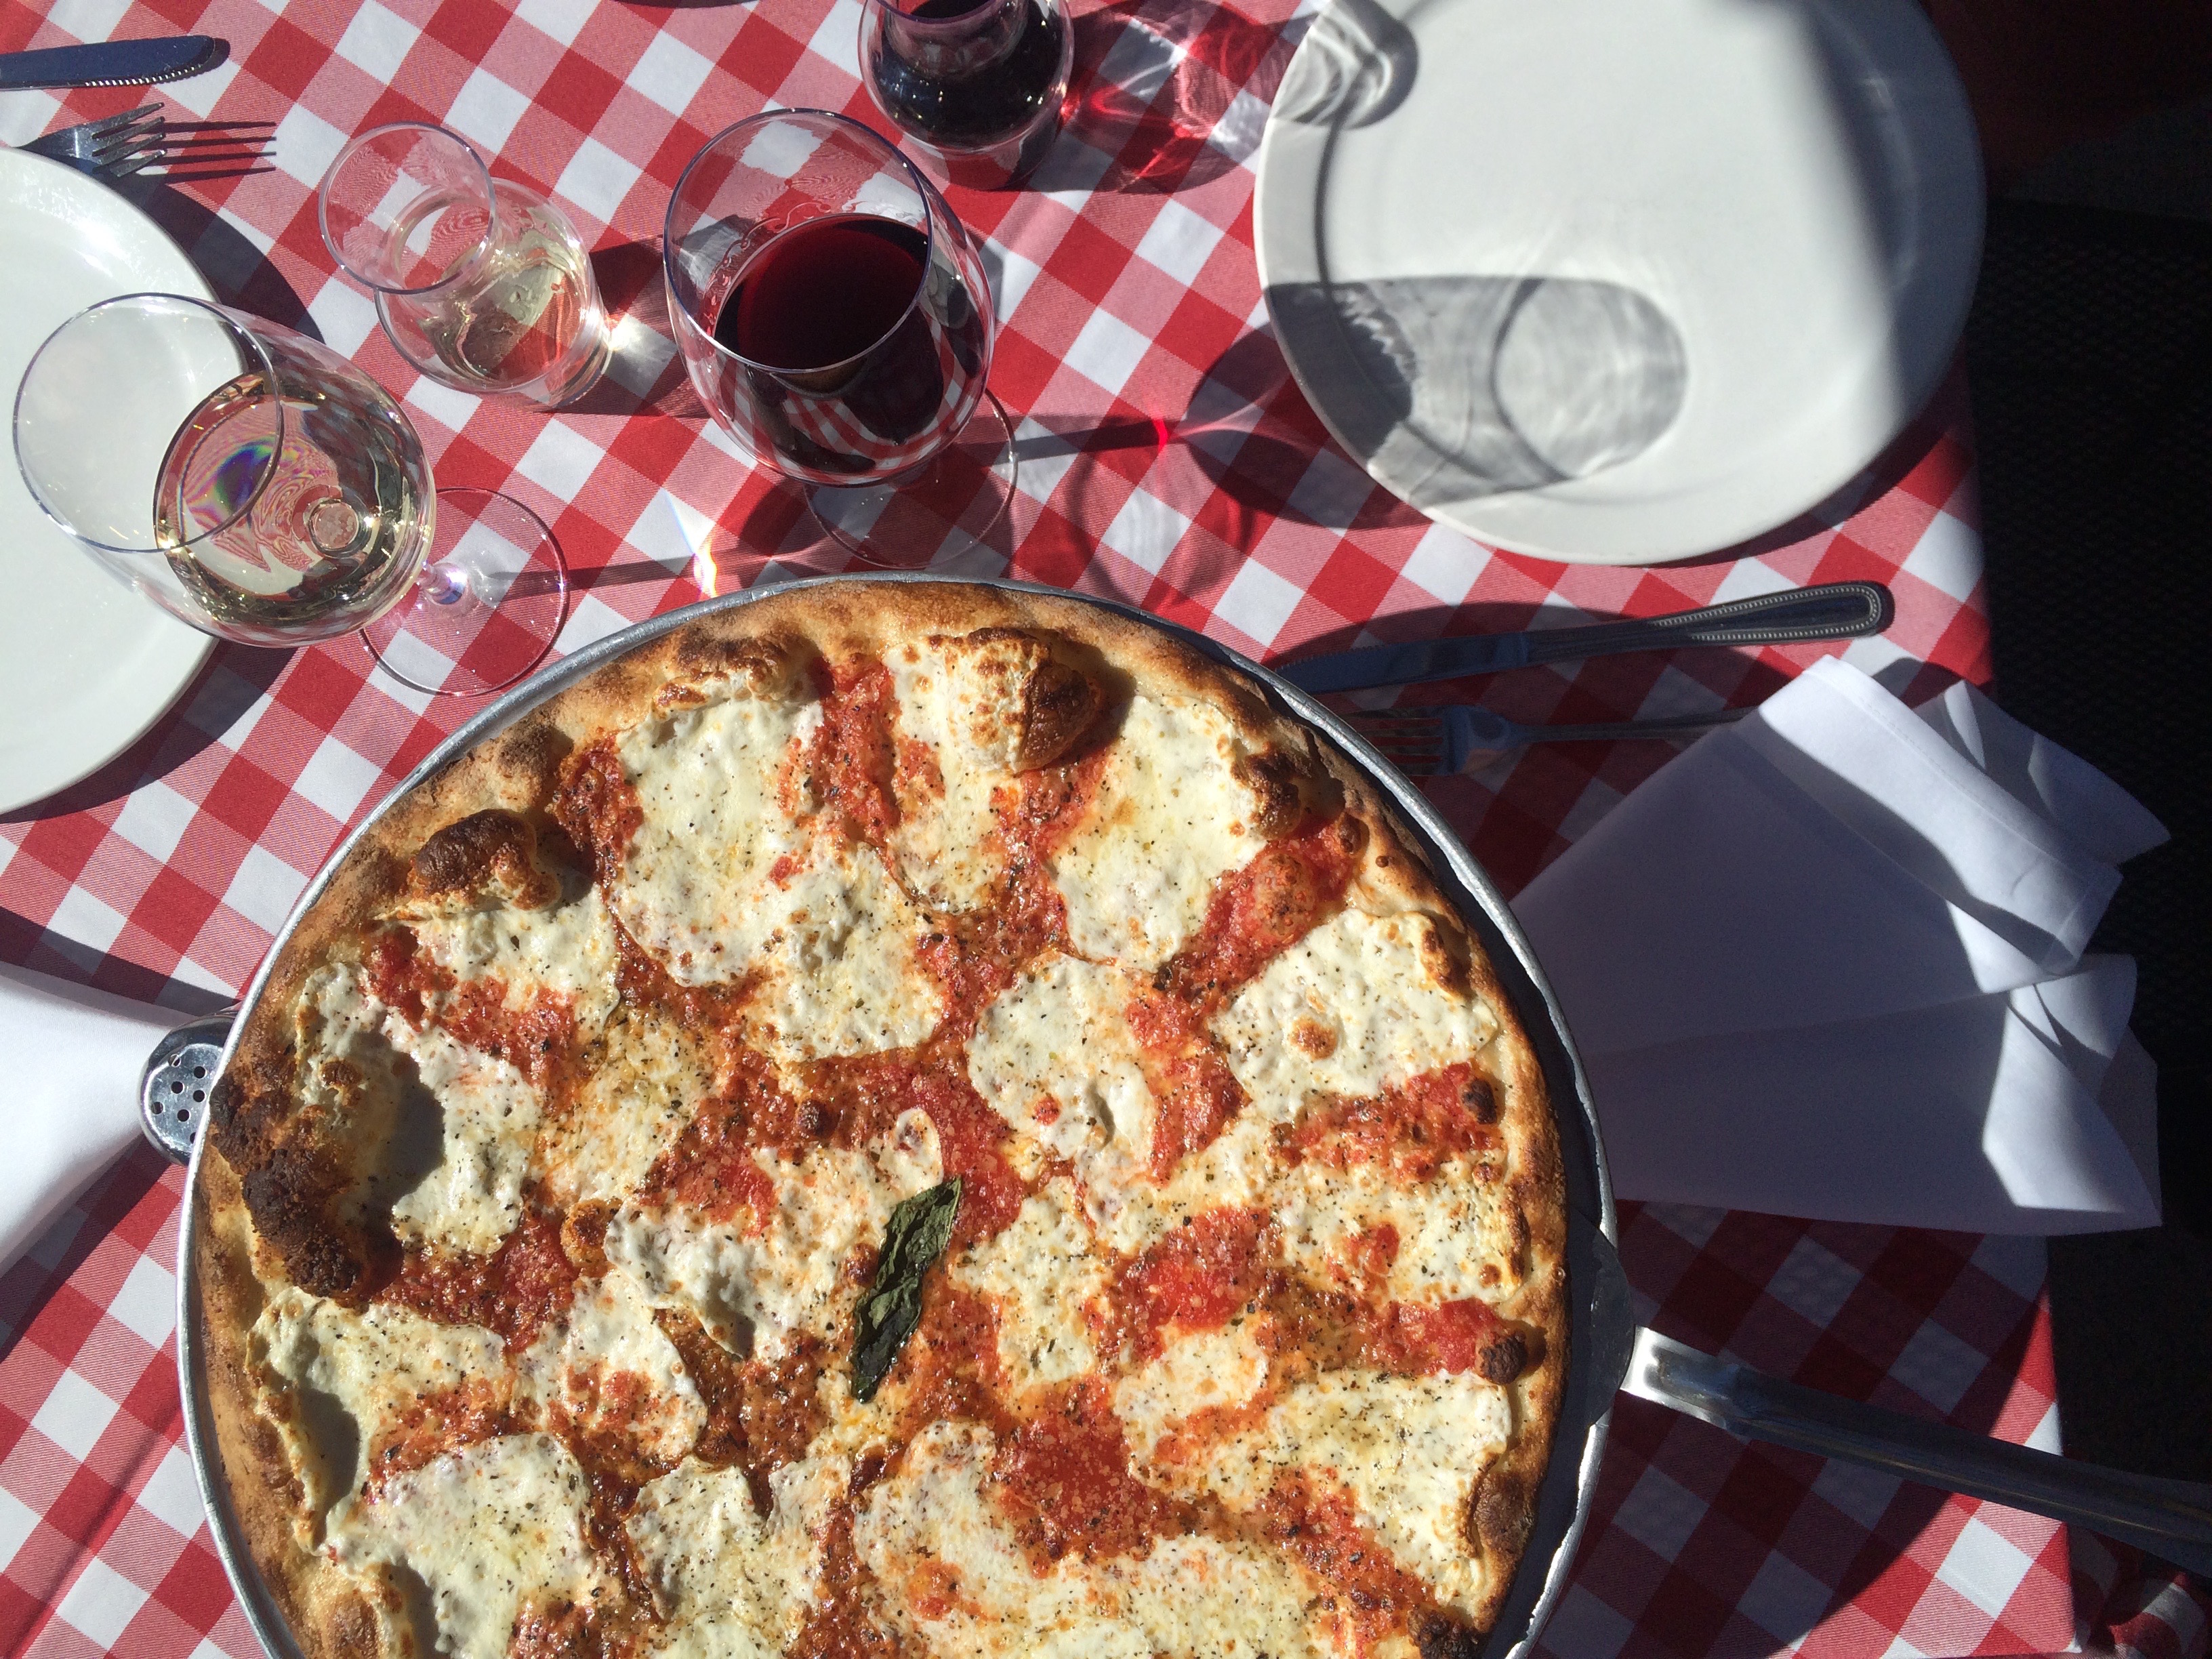 A pizza with mozzarella and red sauce sits on top of a red-checkered tablecloth, with glasses of wine.